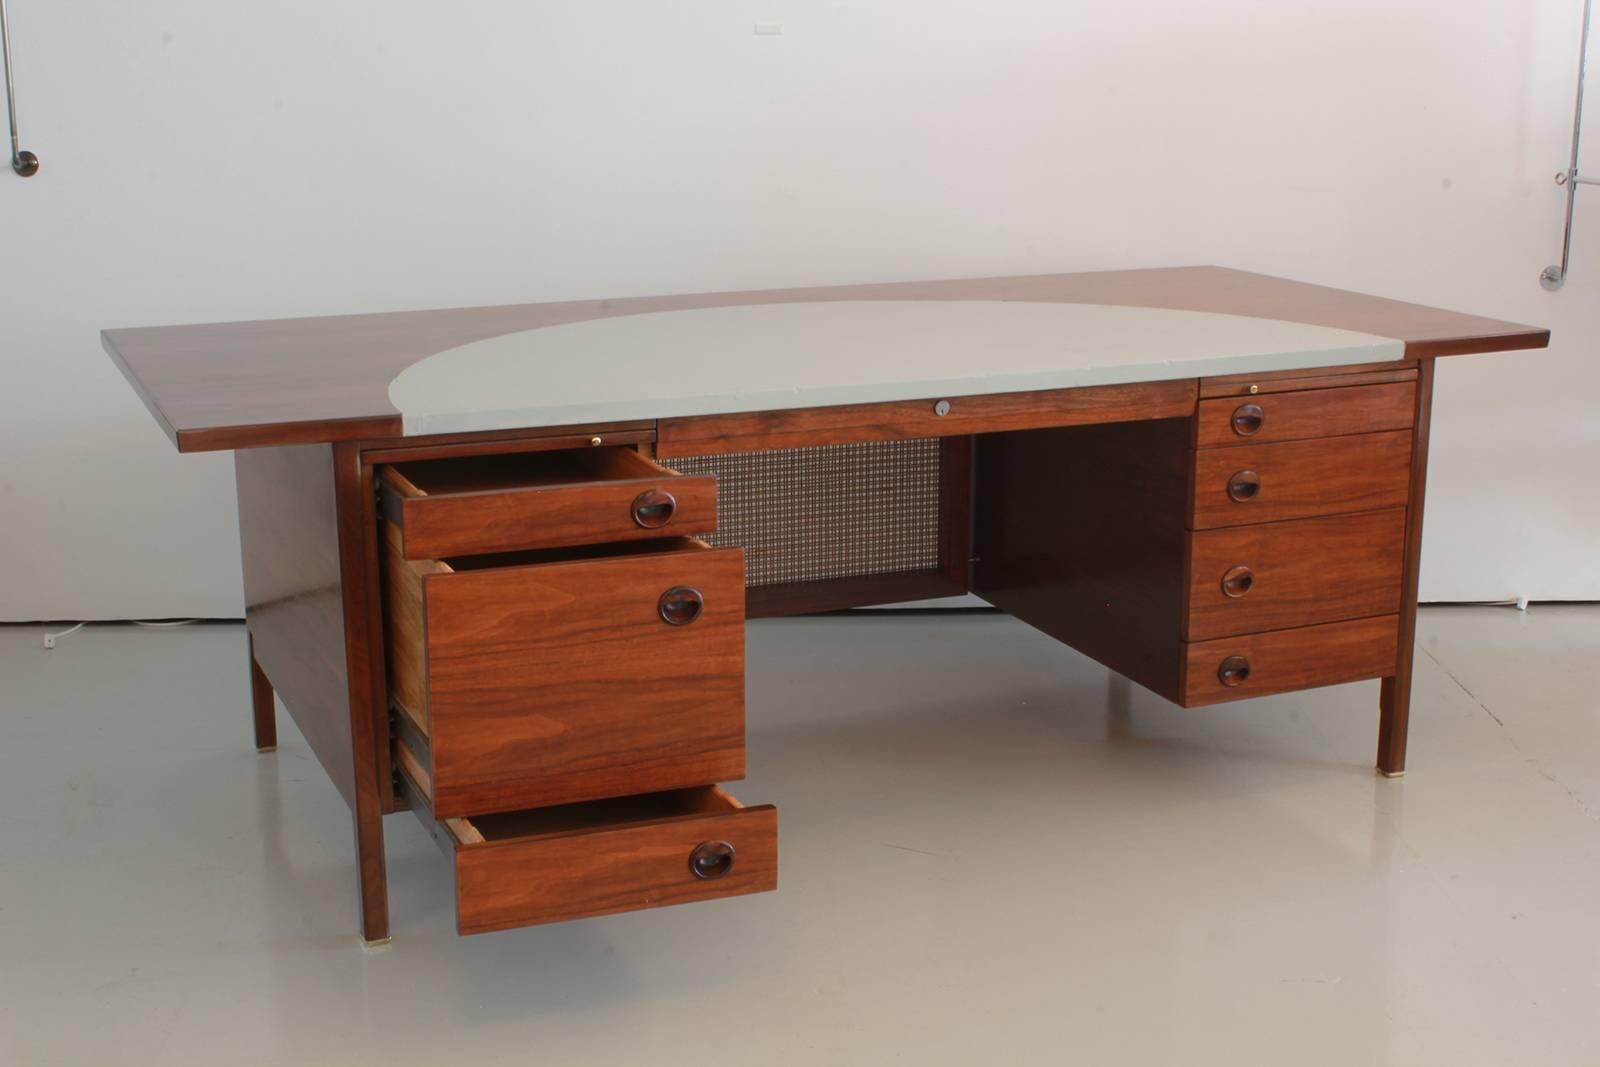 Edward Wormley design executive desk for Dunbar with grey leather inlay. Walnut desk with rosewood pulls and caned modesty panel.
Professionally refinished.